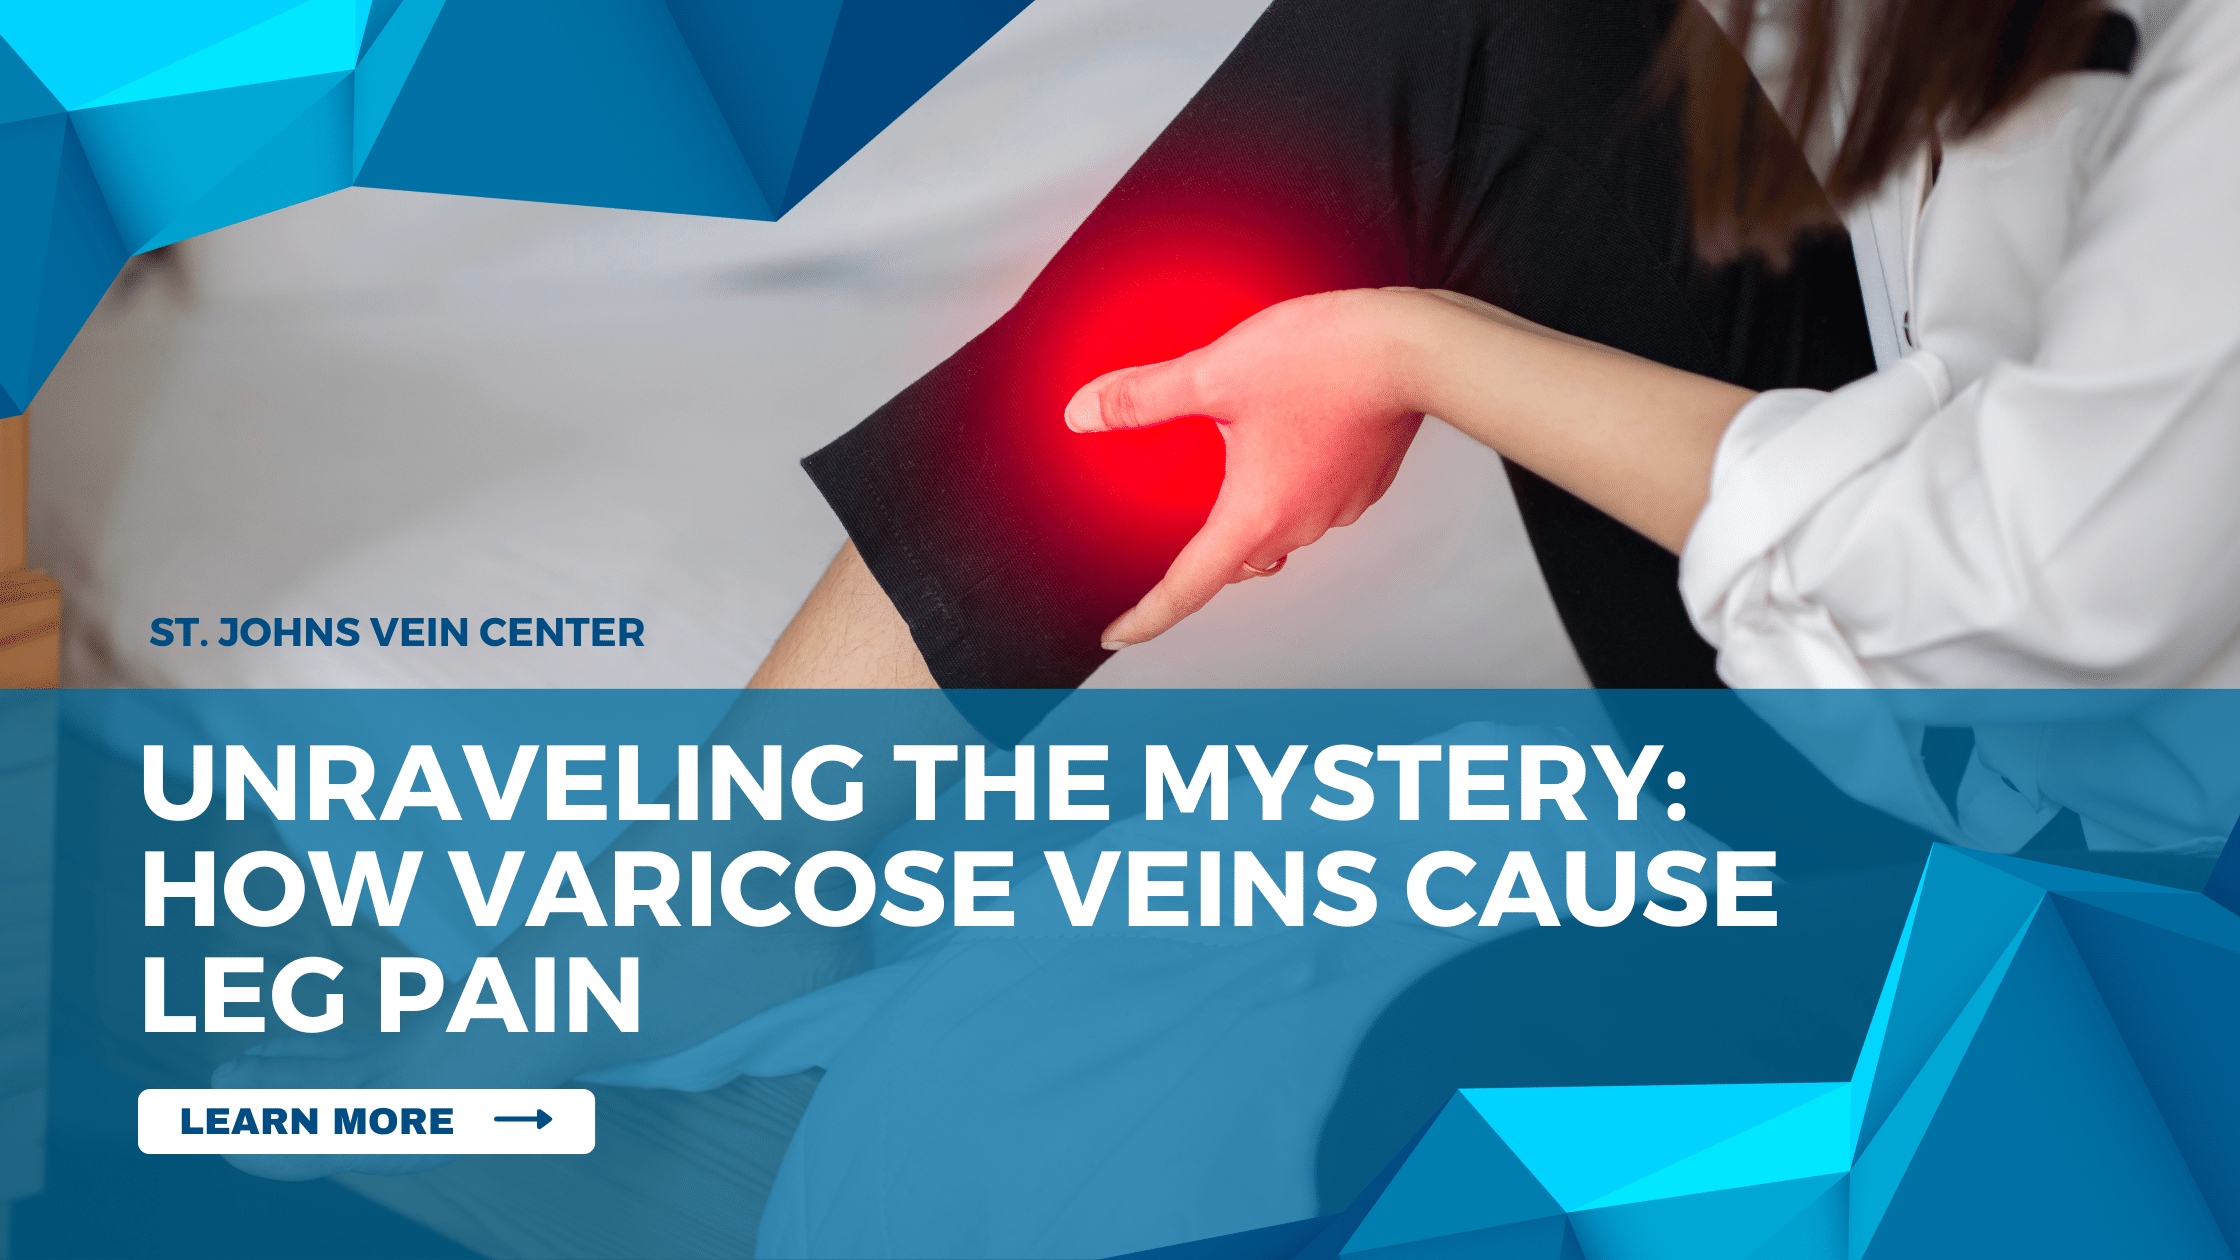 Unraveling the Mystery How Varicose Veins Cause Leg Pain